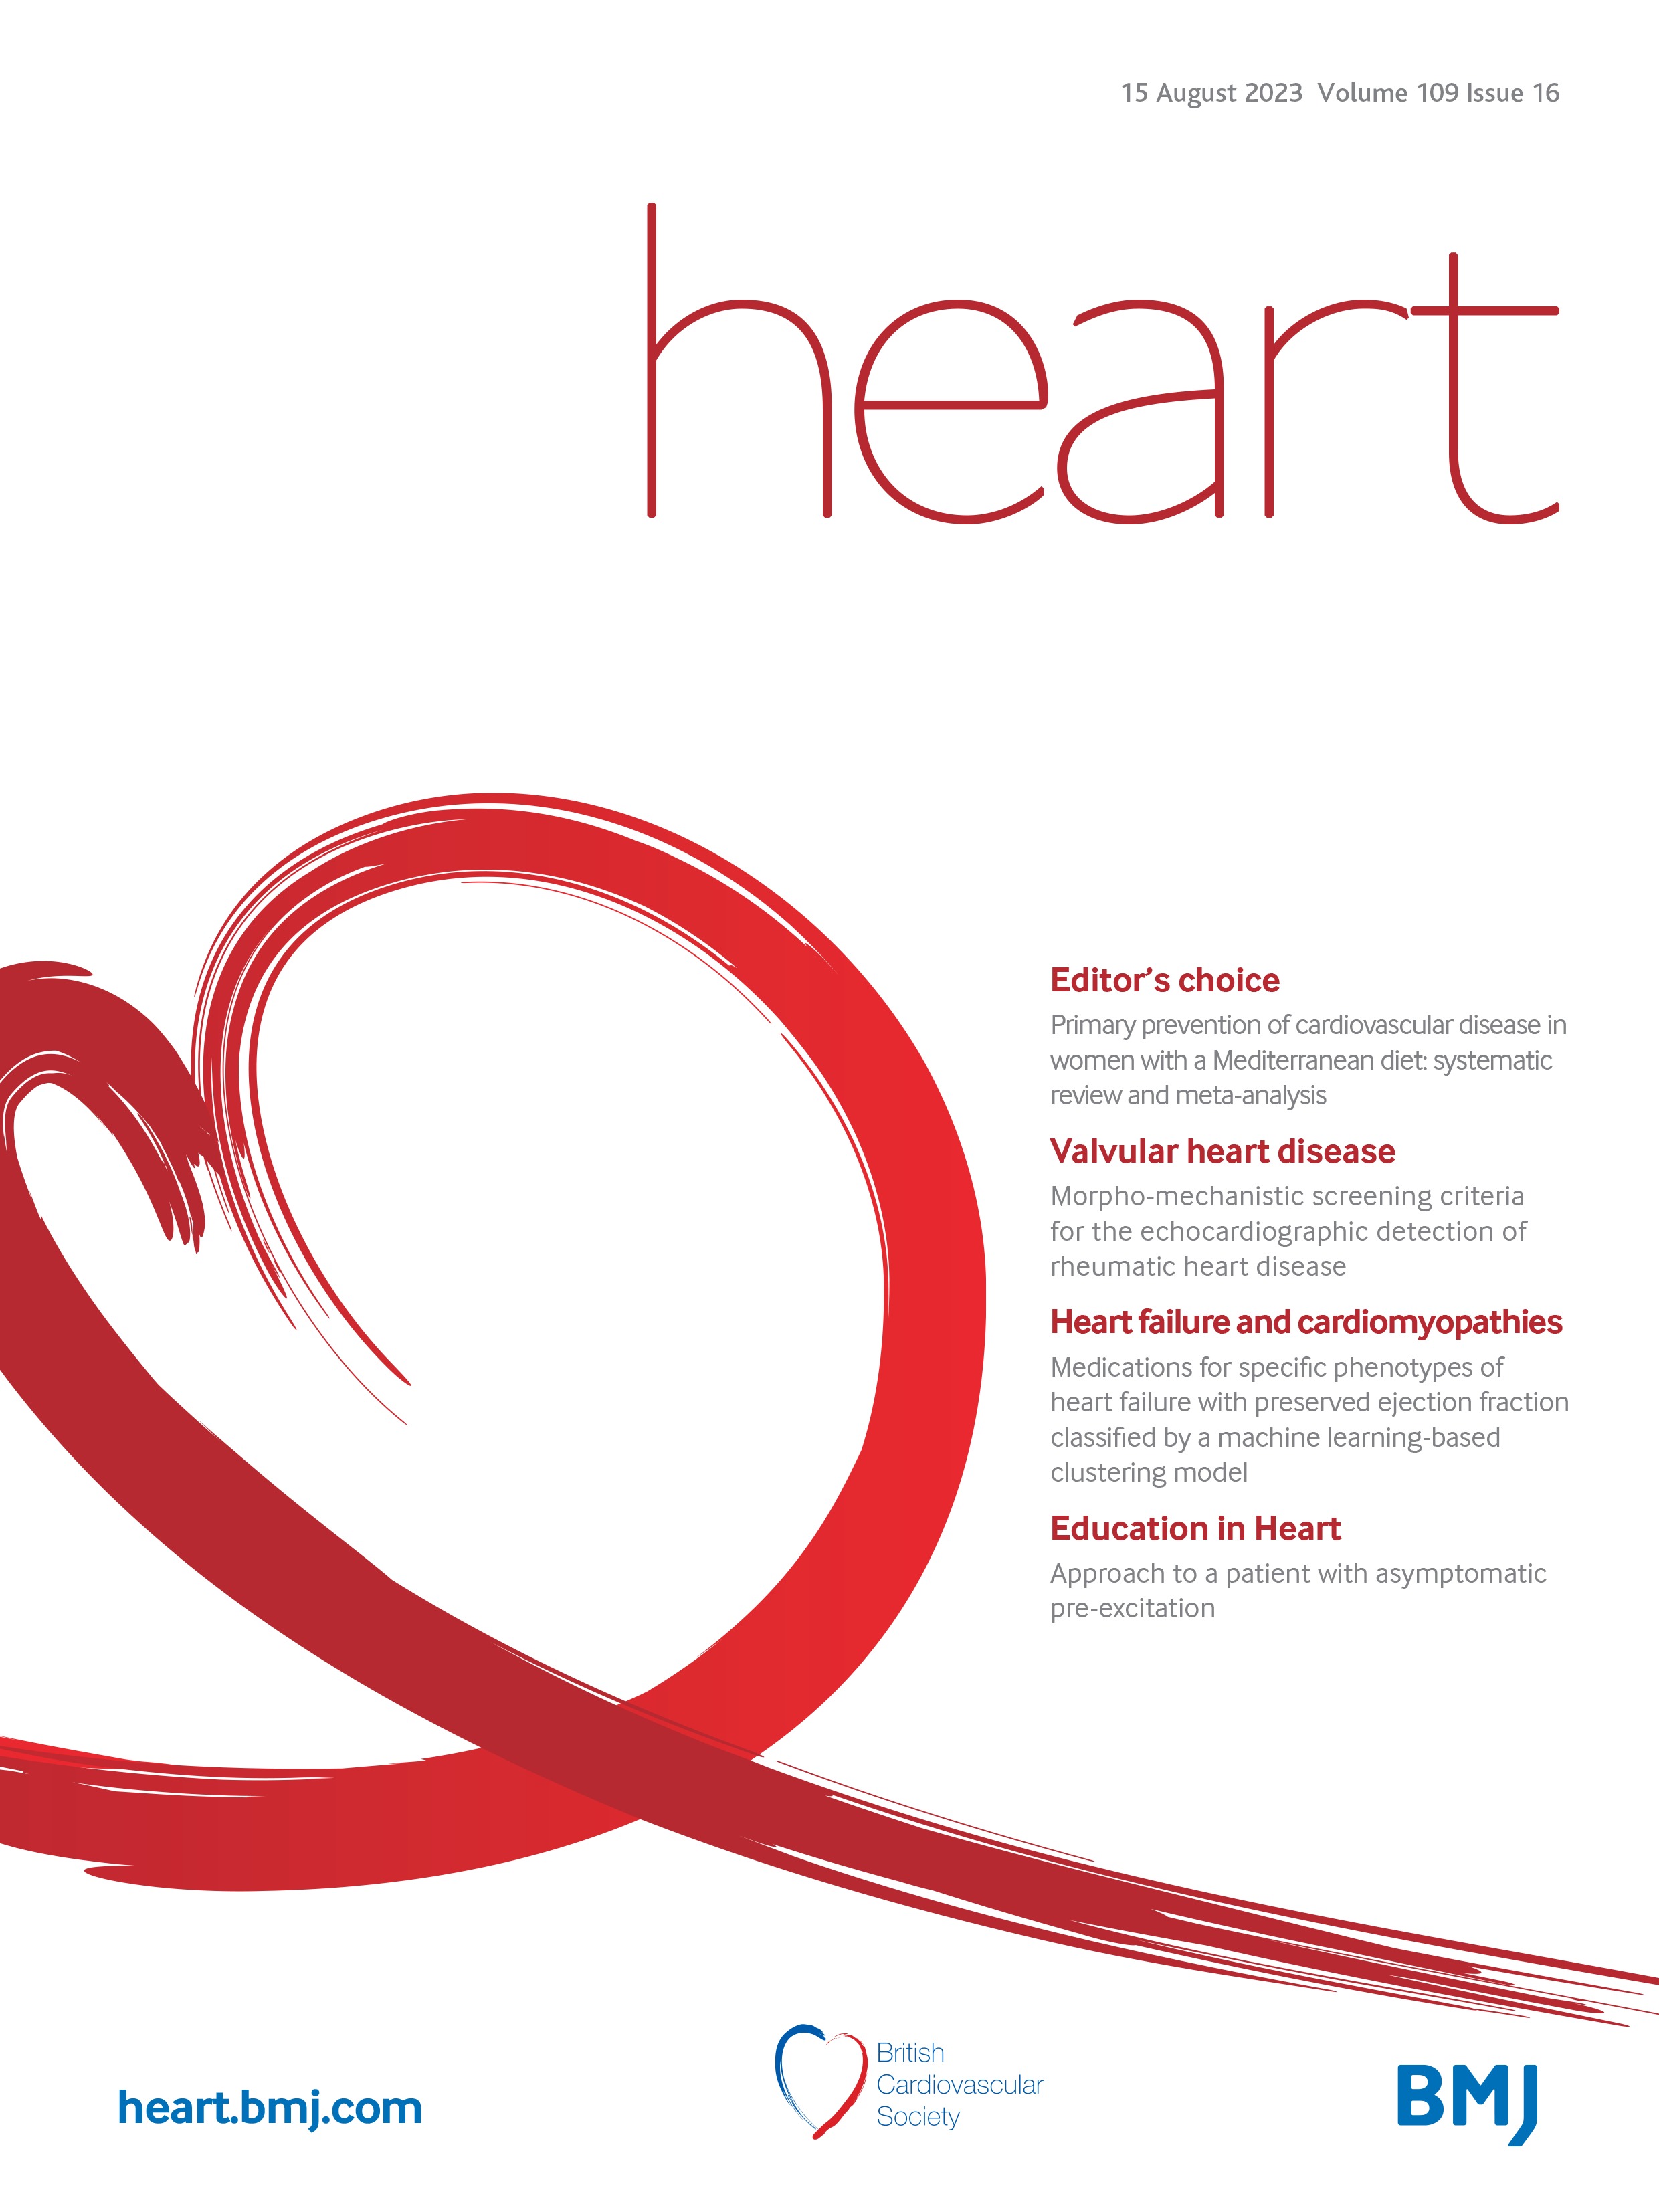 Primary prevention of cardiovascular disease in women with a Mediterranean diet: systematic review and meta-analysis